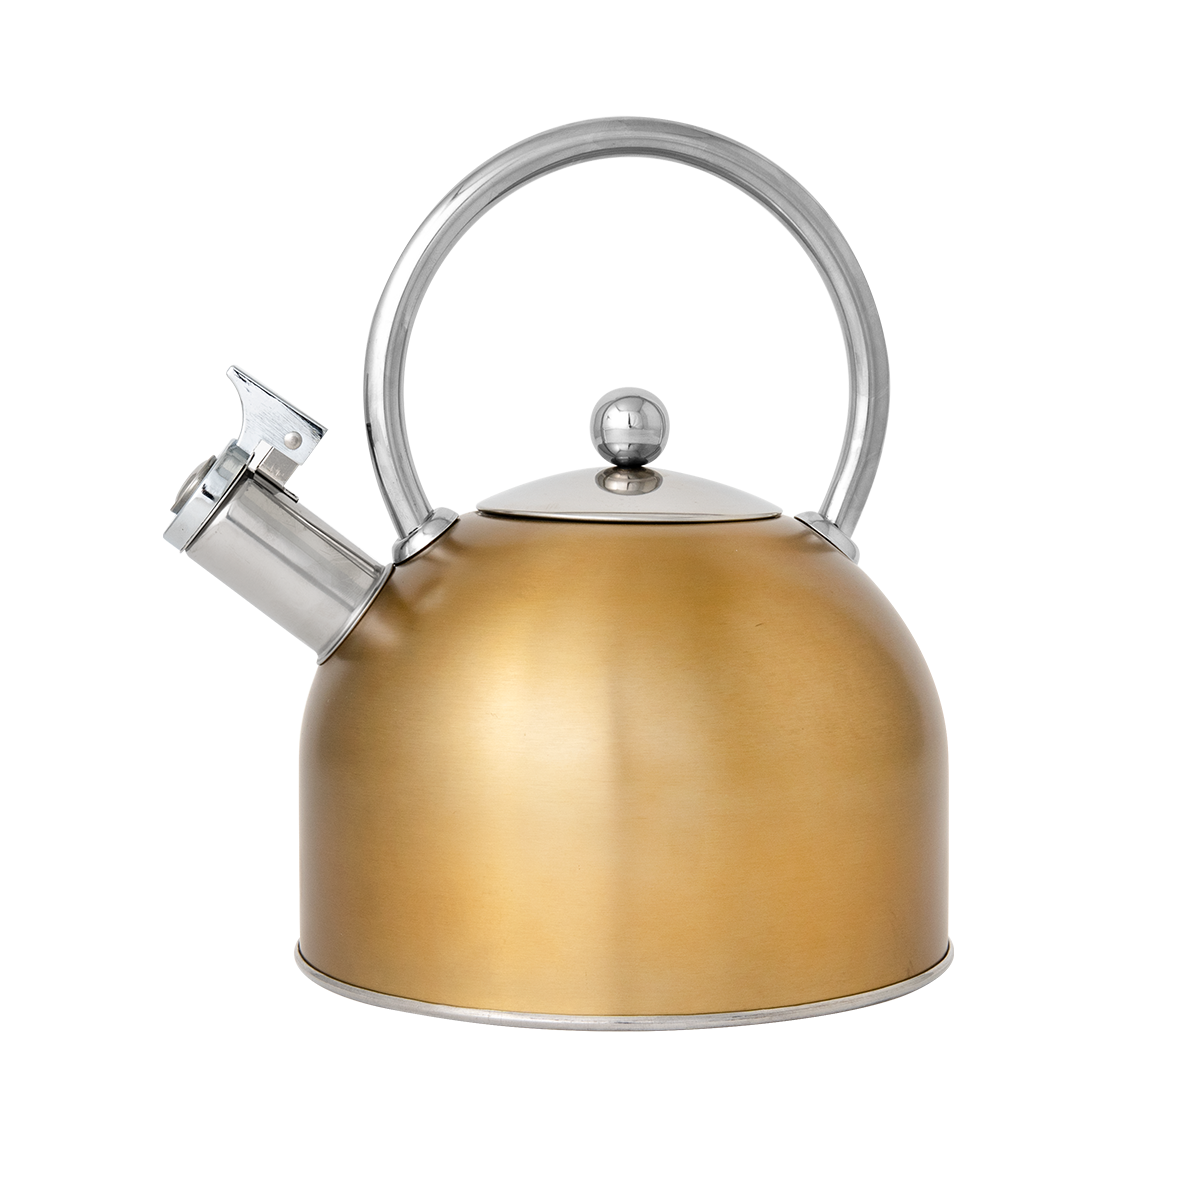 Gold kettle